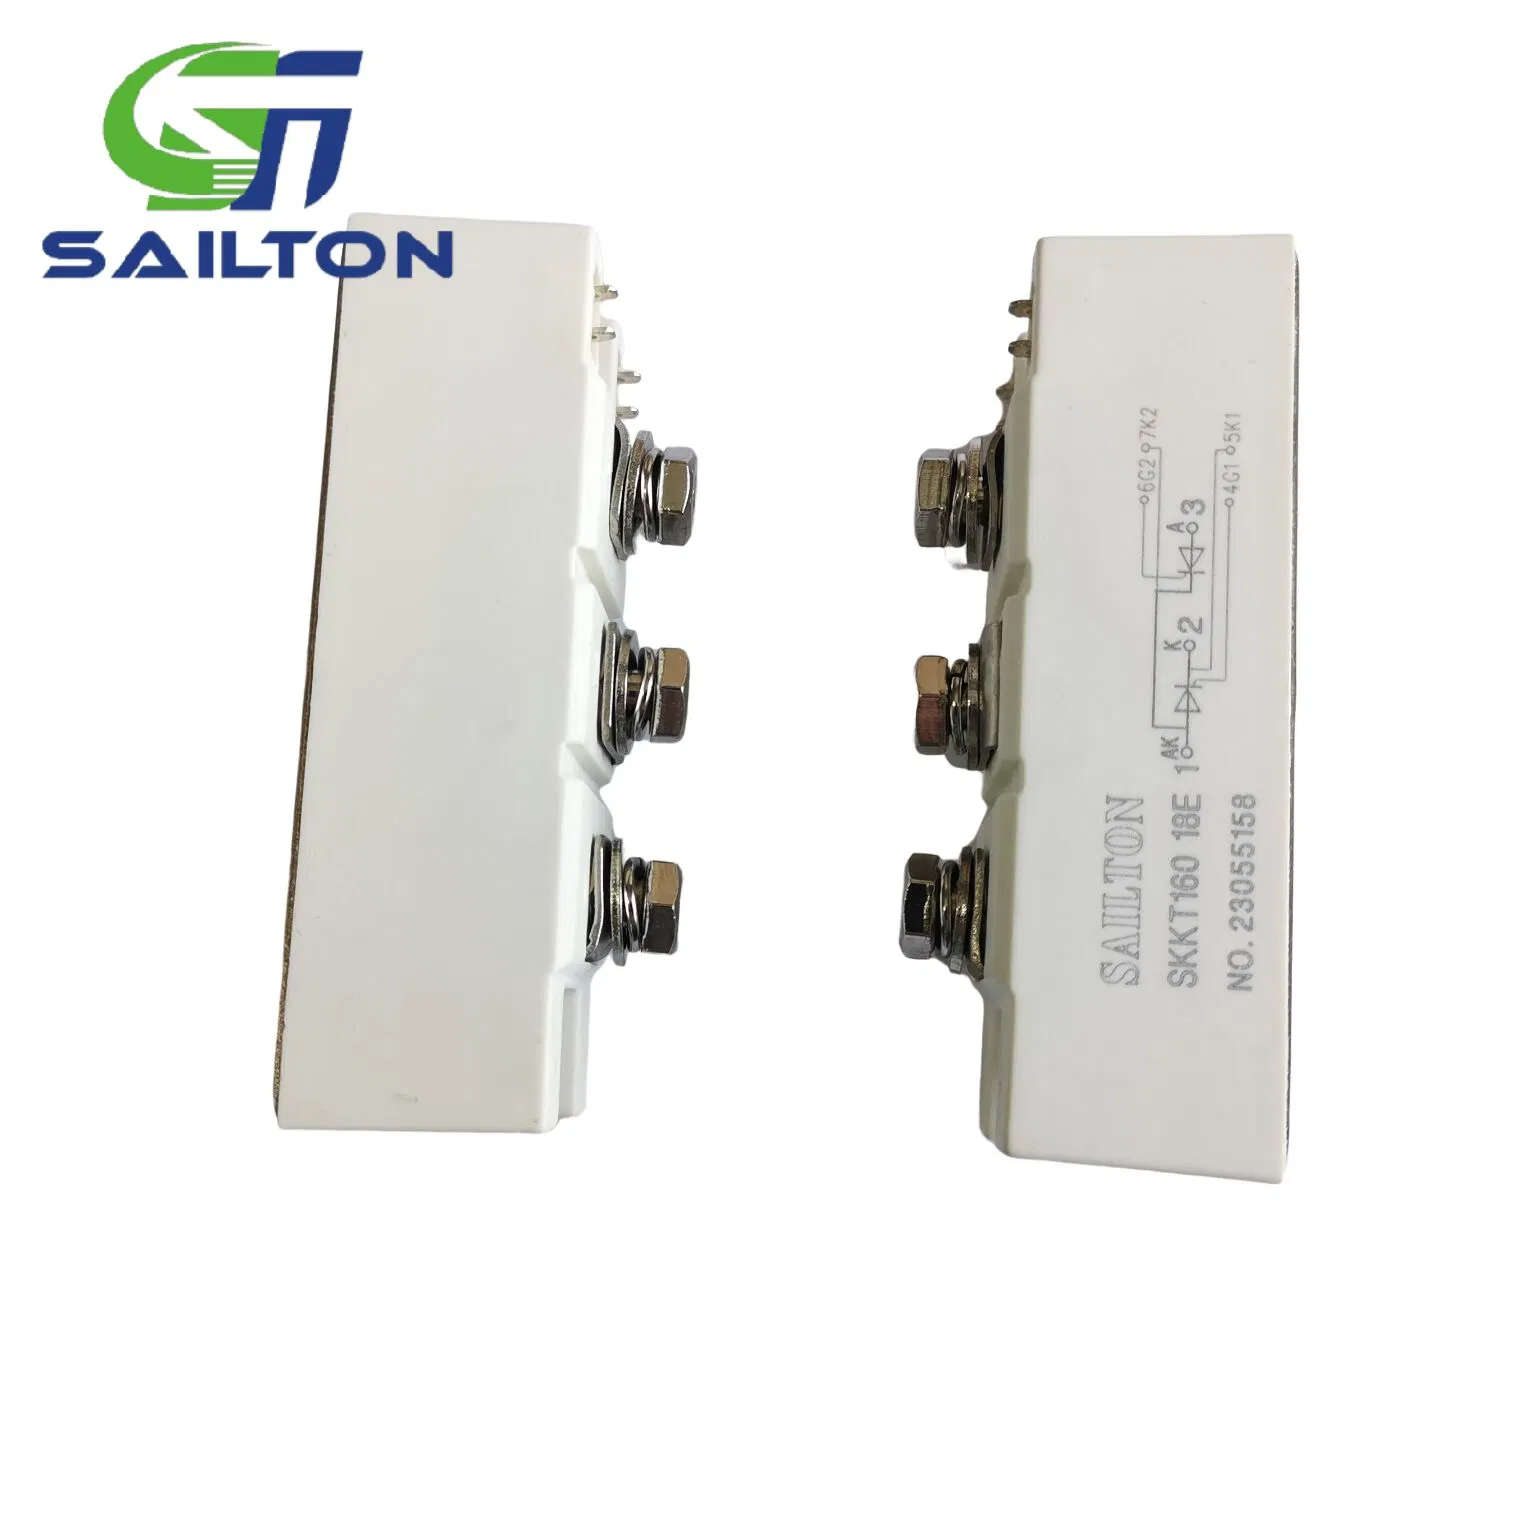 Thyristor Modules Power Module Electronic Component Semiconductor Devices